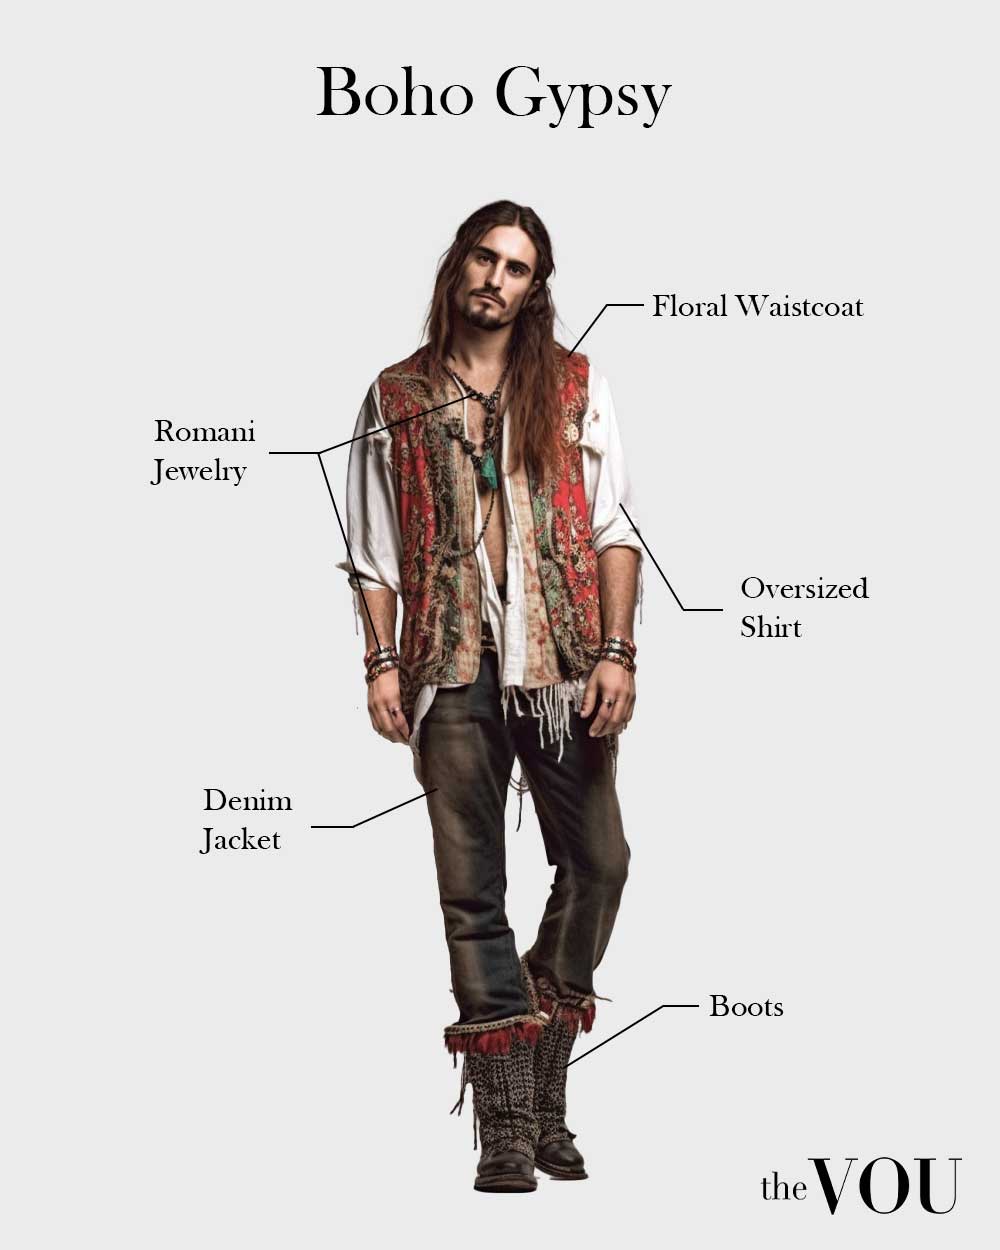 boho gypsy outfit for men: floral waistcoat, romani jewelry, oversized shirt, jeans, boots